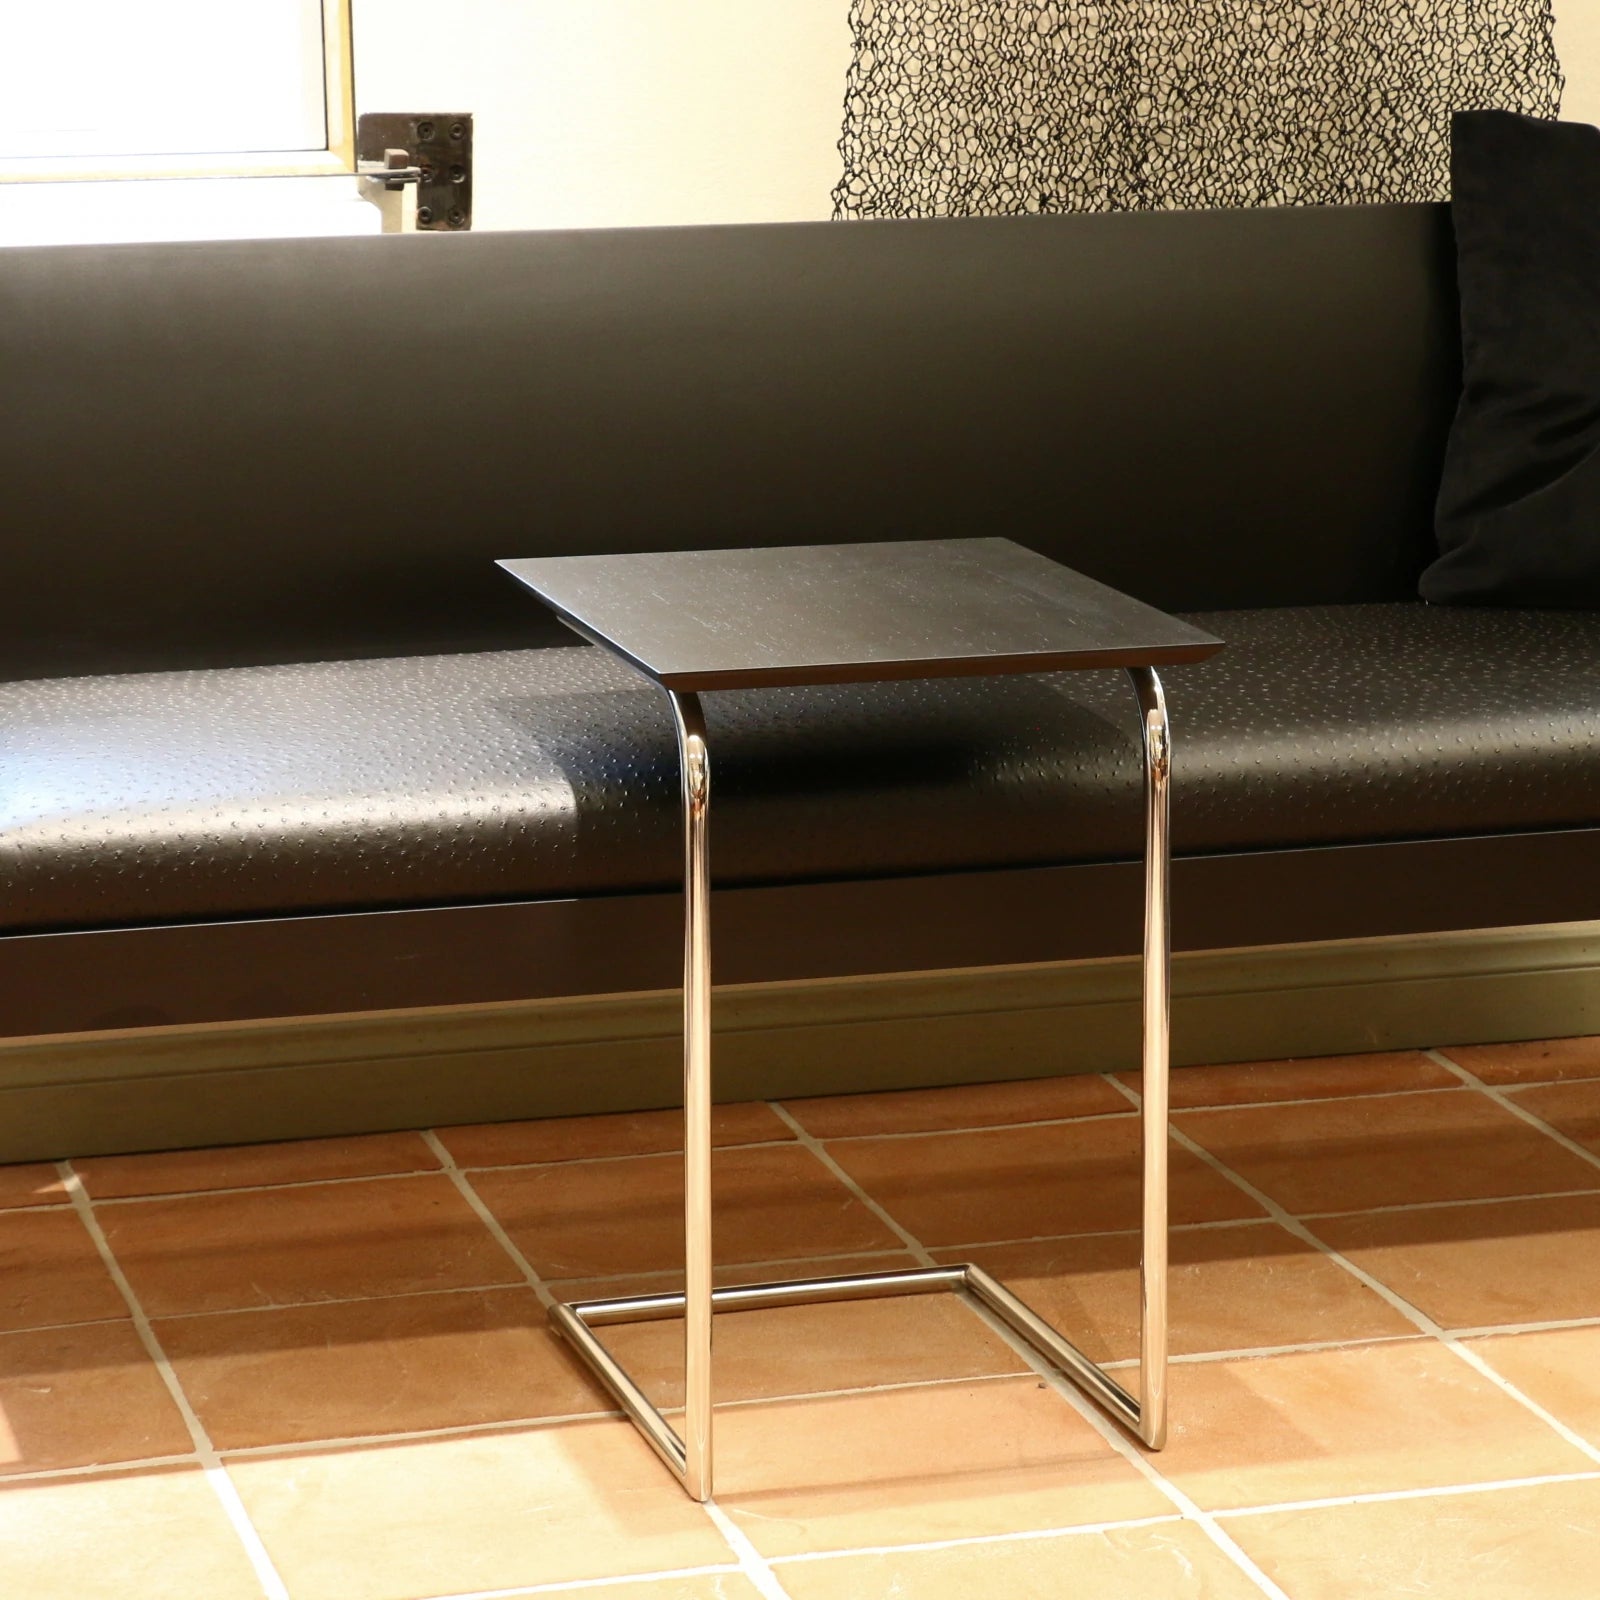 Max side table by Deka